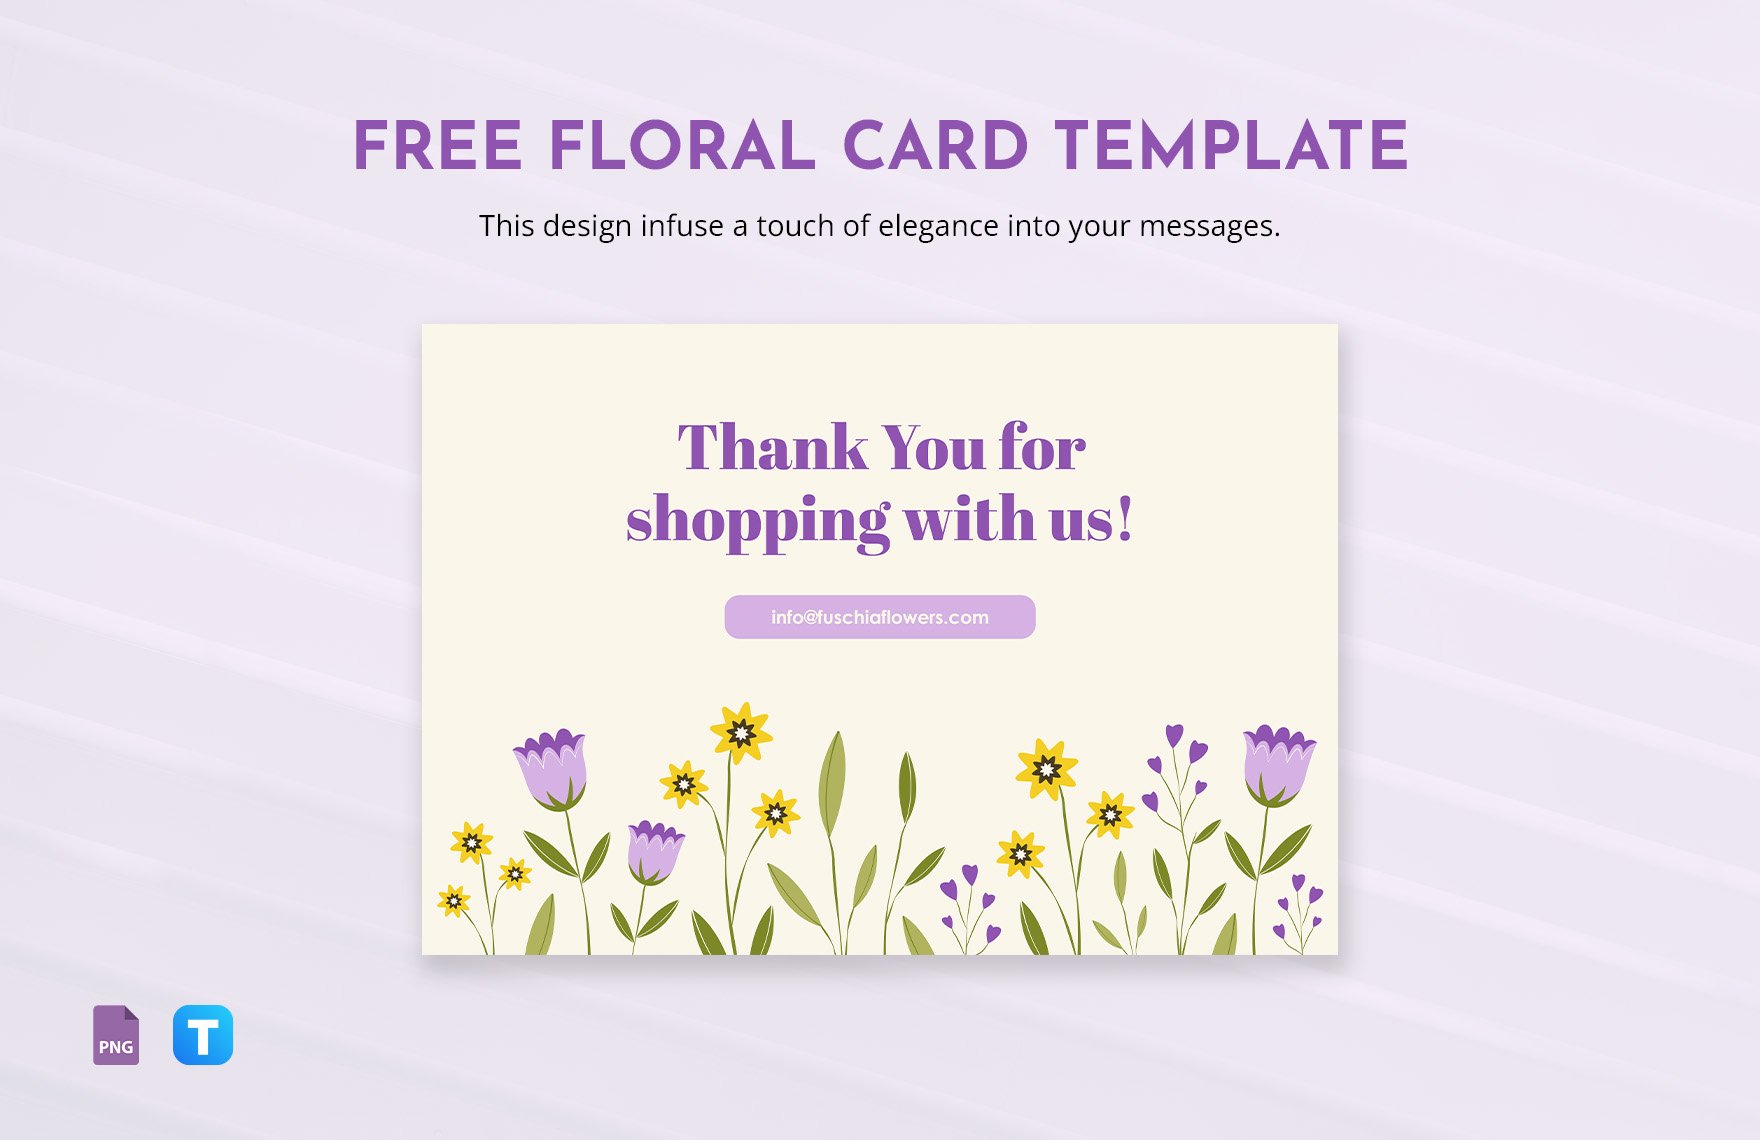 Free Floral Card Template in PNG